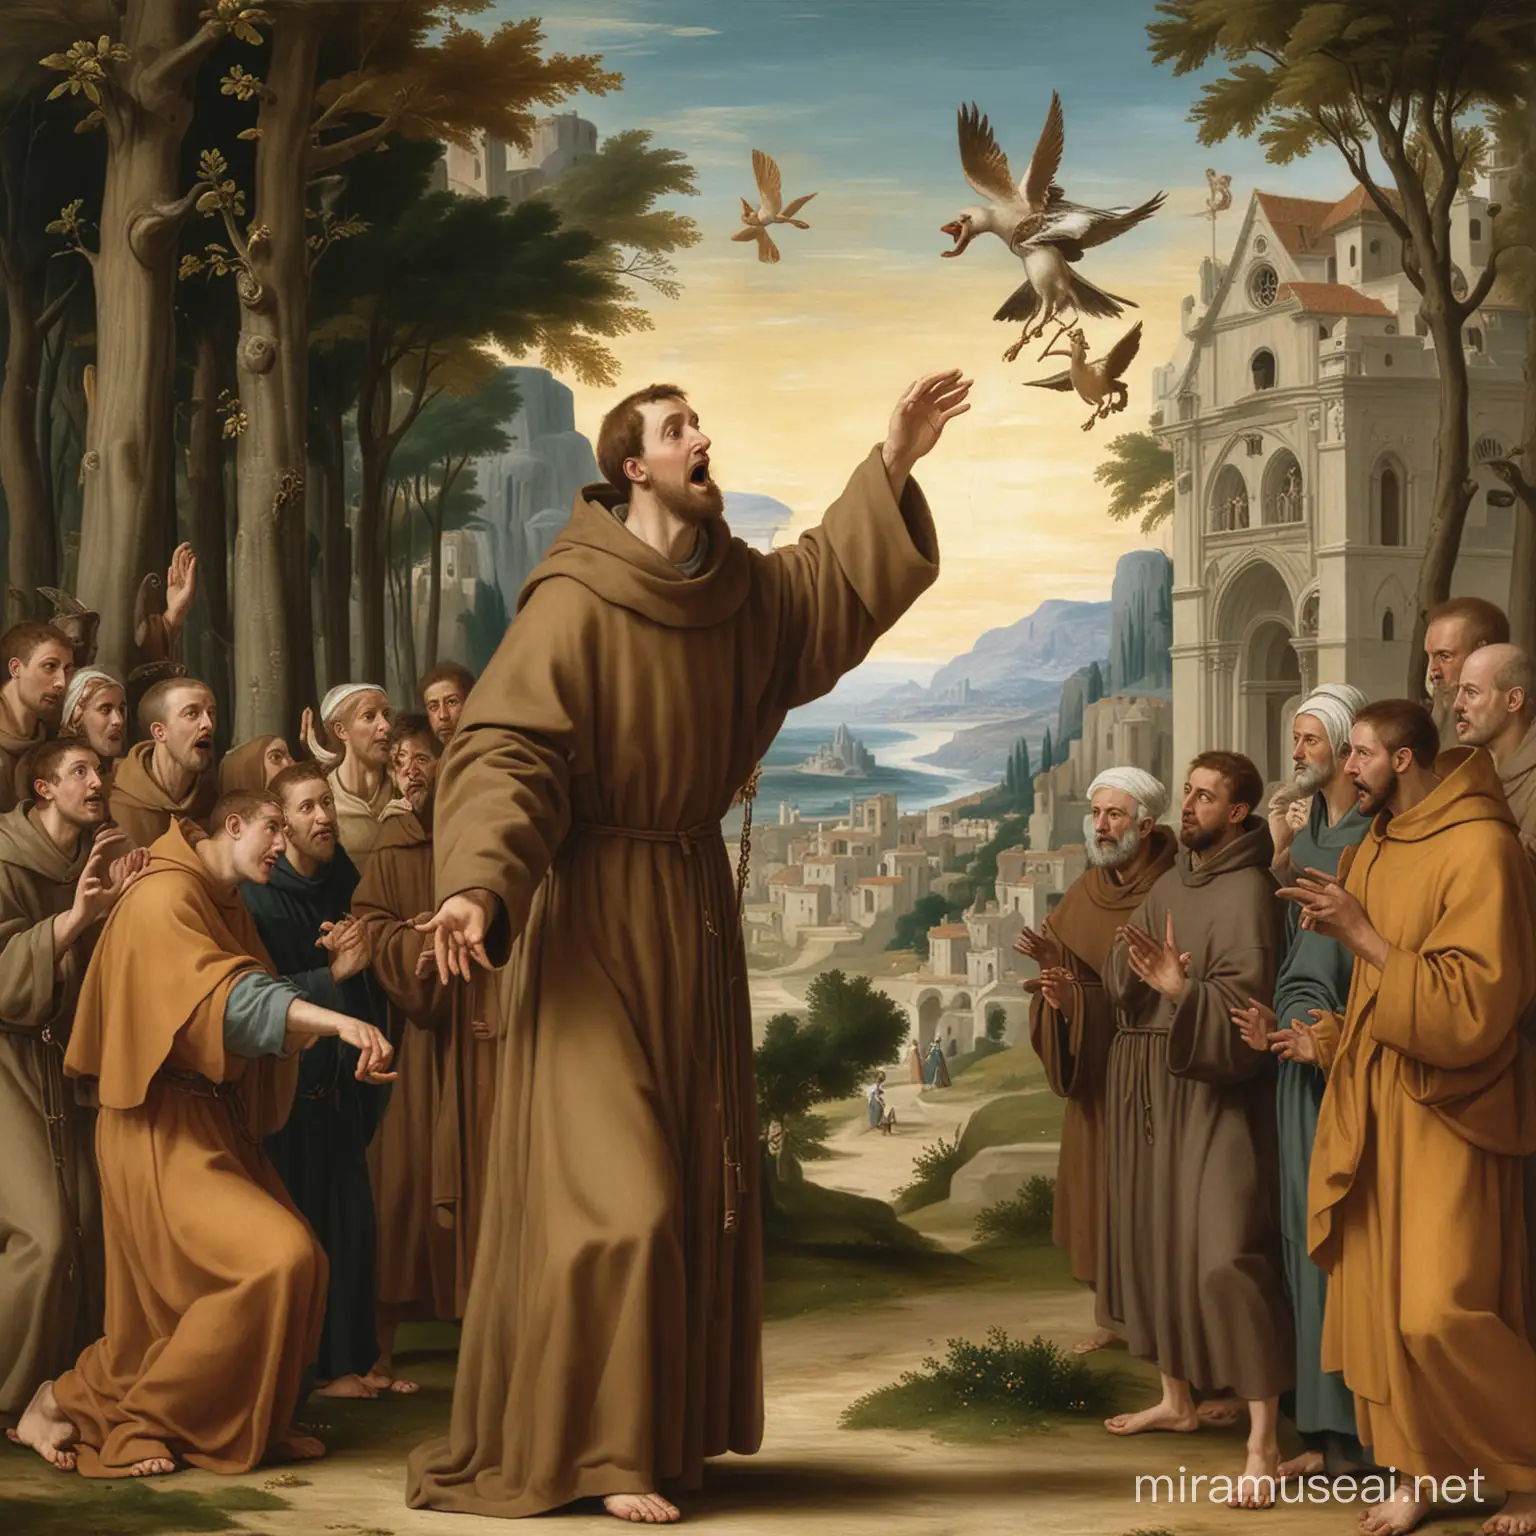 St Francis of Assisi Preaching Sermon in Nature